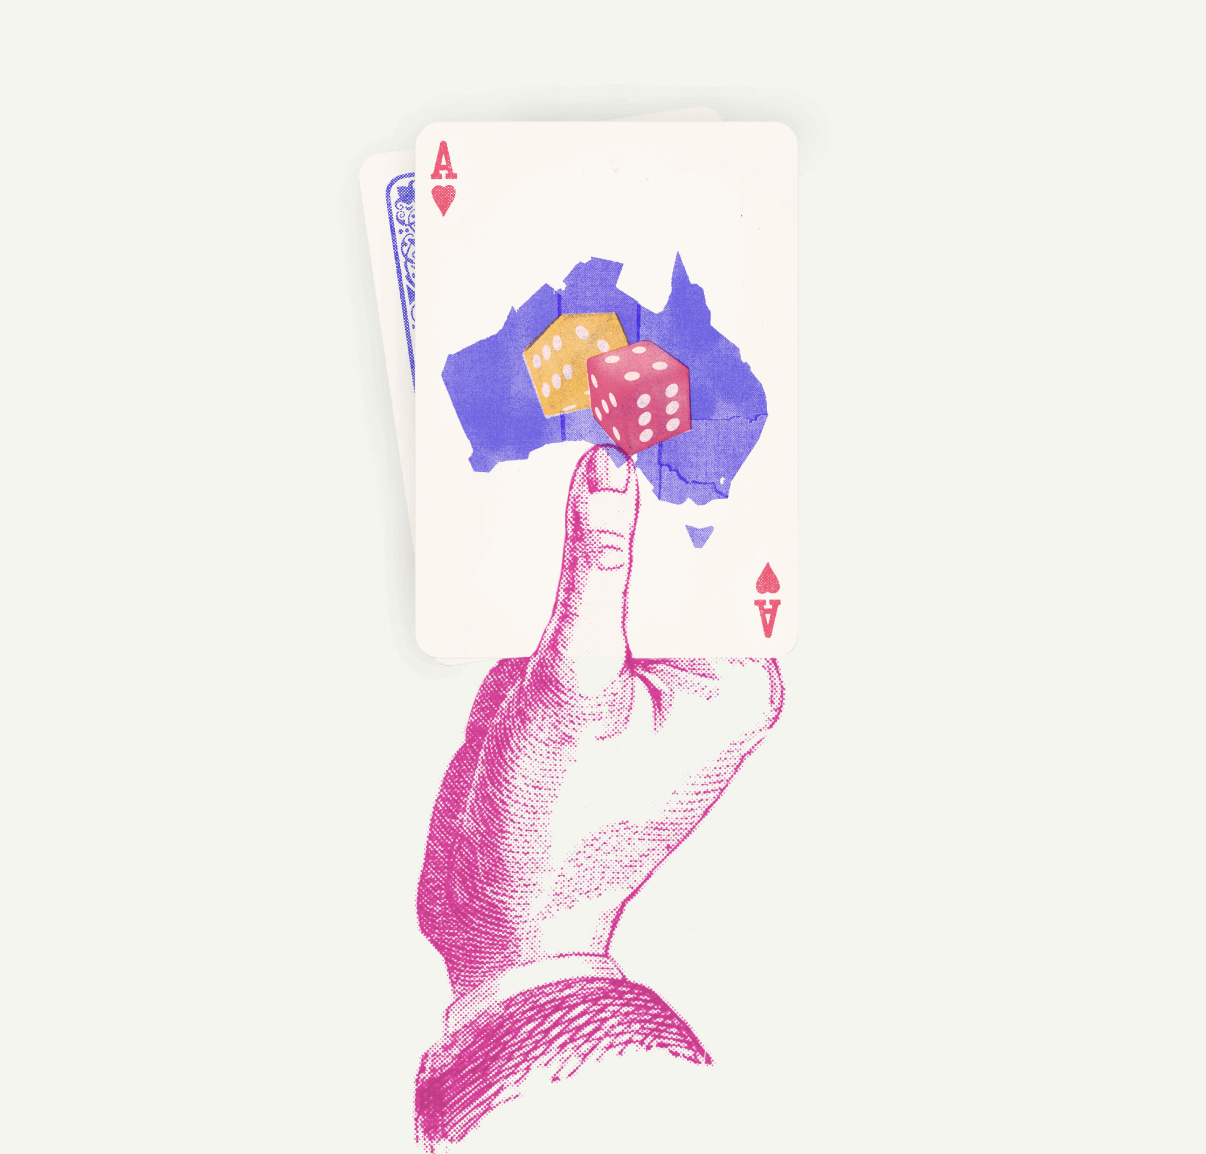 Collage showing a hand holding a playing card with an illustration of dice overlaid on a map of Australia.